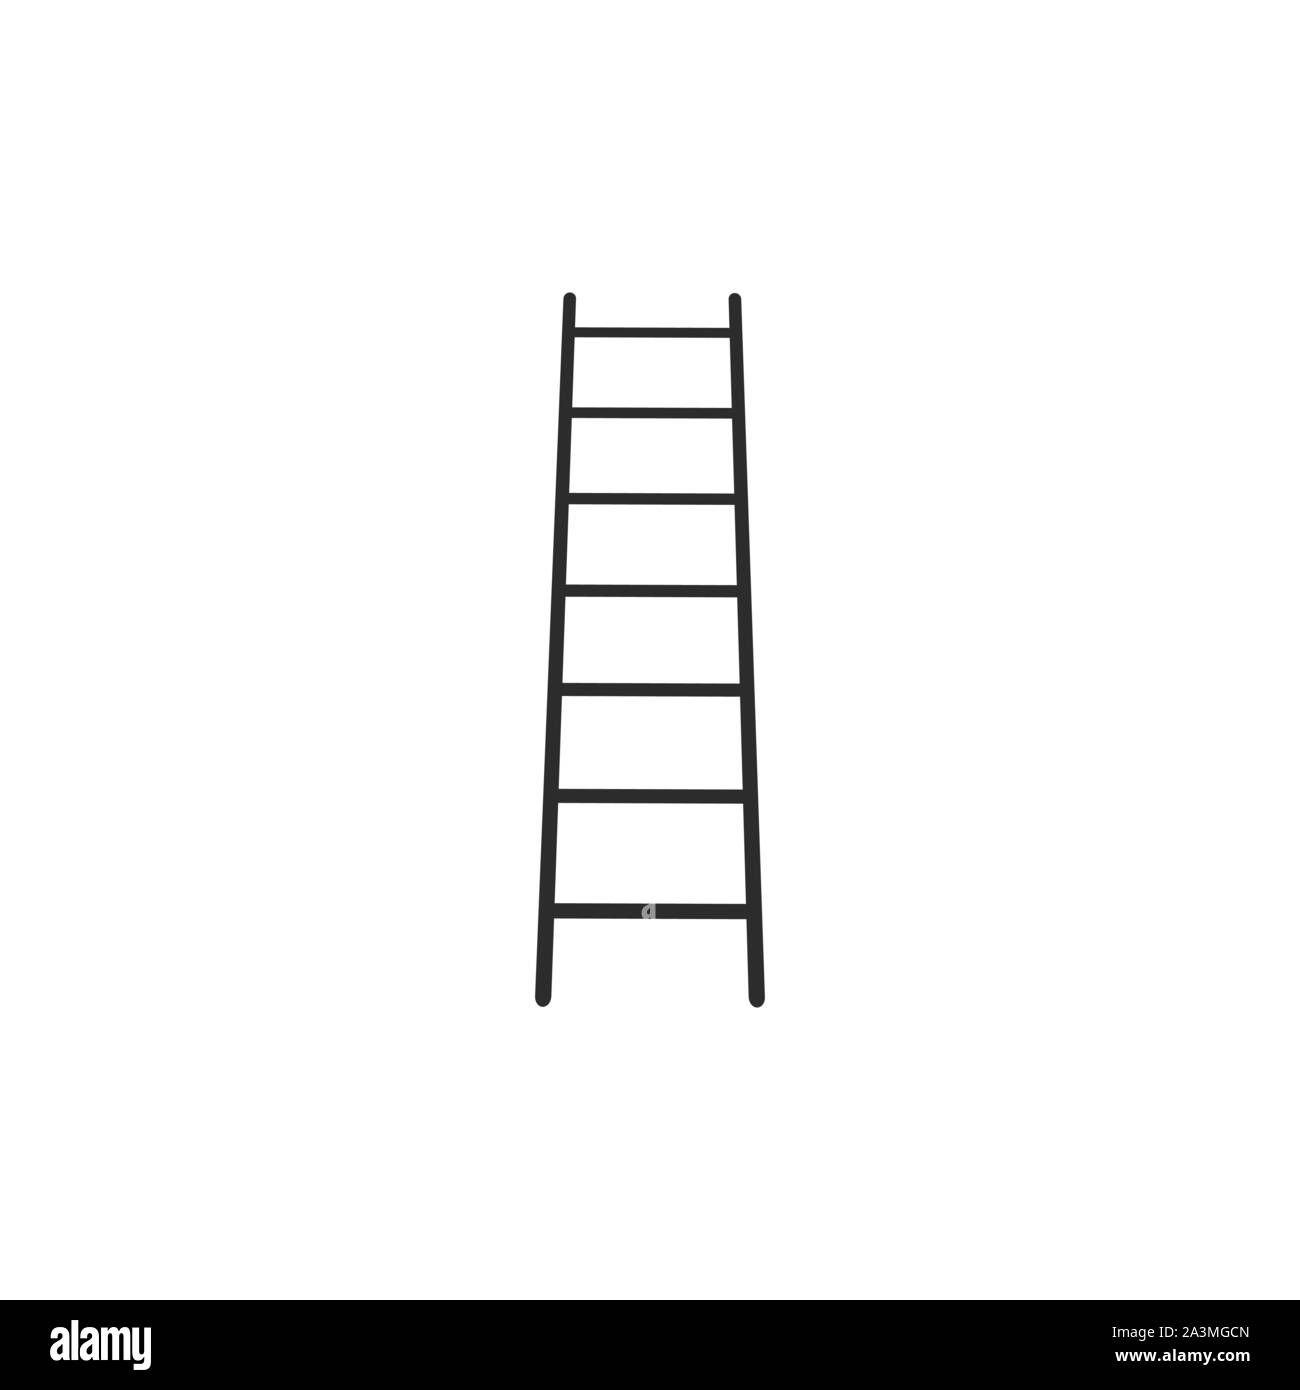 Ladder, Stairs icon. Vector illustration, flat design. Stock Vector